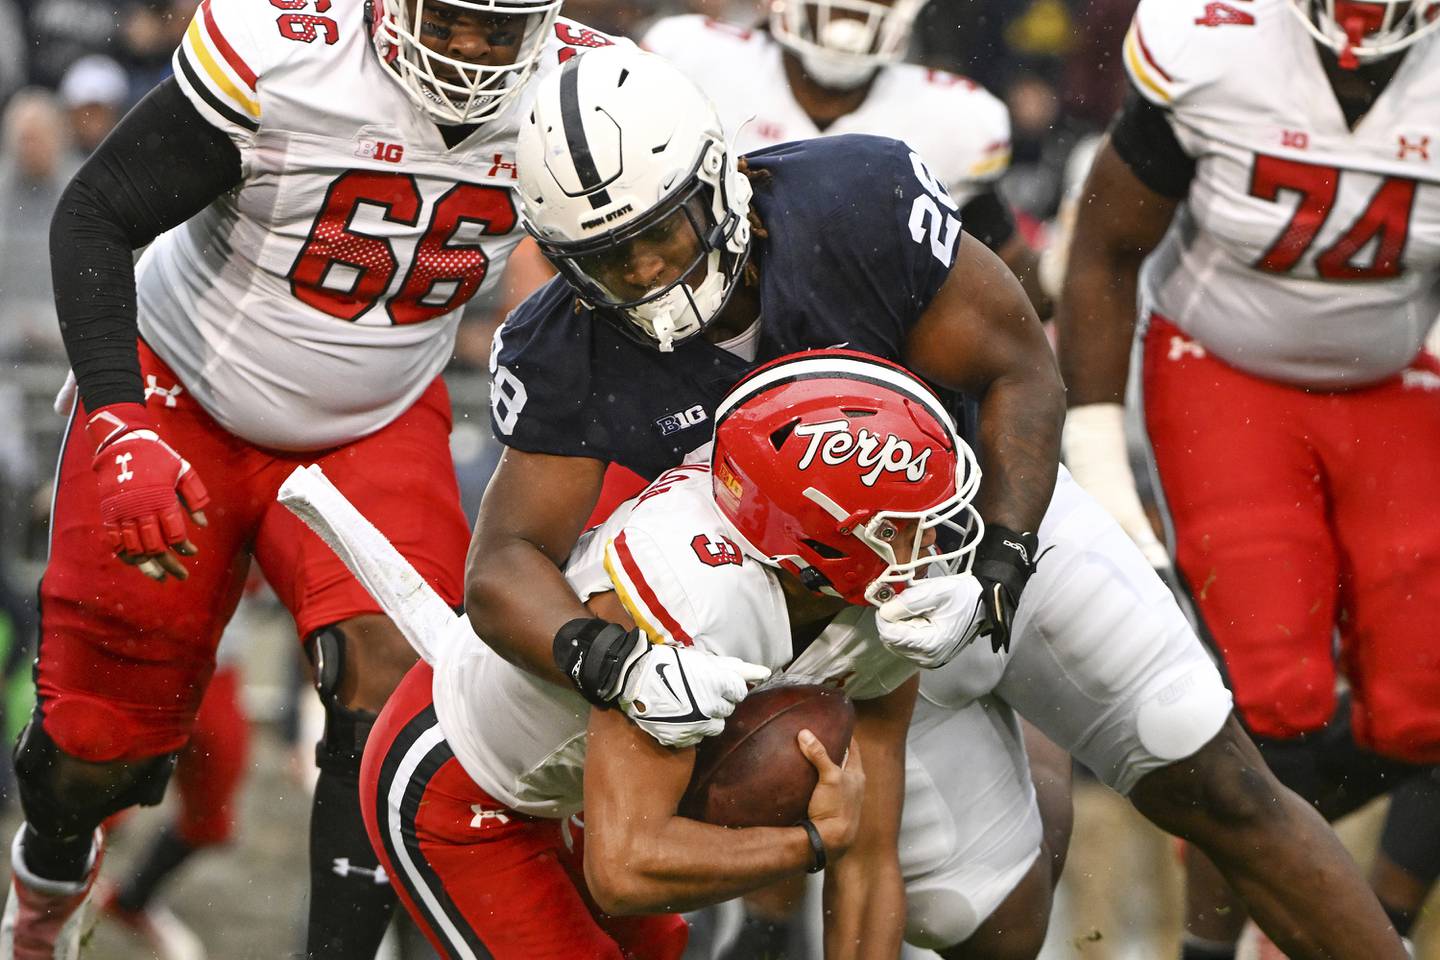 Penn State defensive tackle Zane Durant sacks Maryland quarterback Taulia Tagovailoa (3) during the first half of an NCAA college football game, Saturday, Nov. 12, 2022, in State College, Pa.